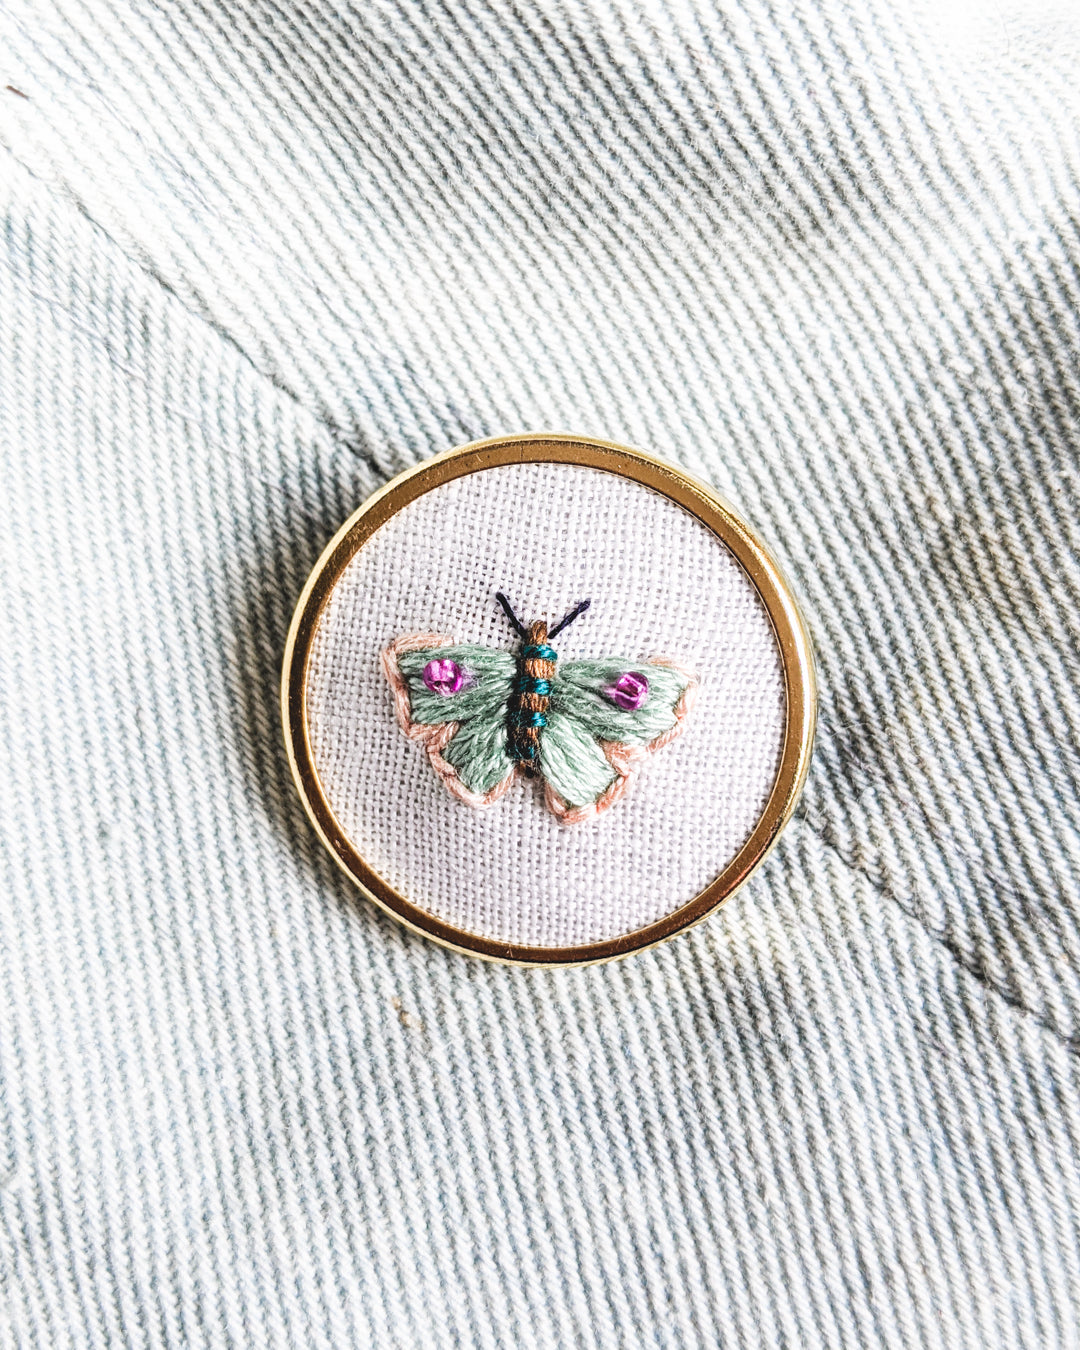 Embroidered Butterfly Moth Pin - no. 2